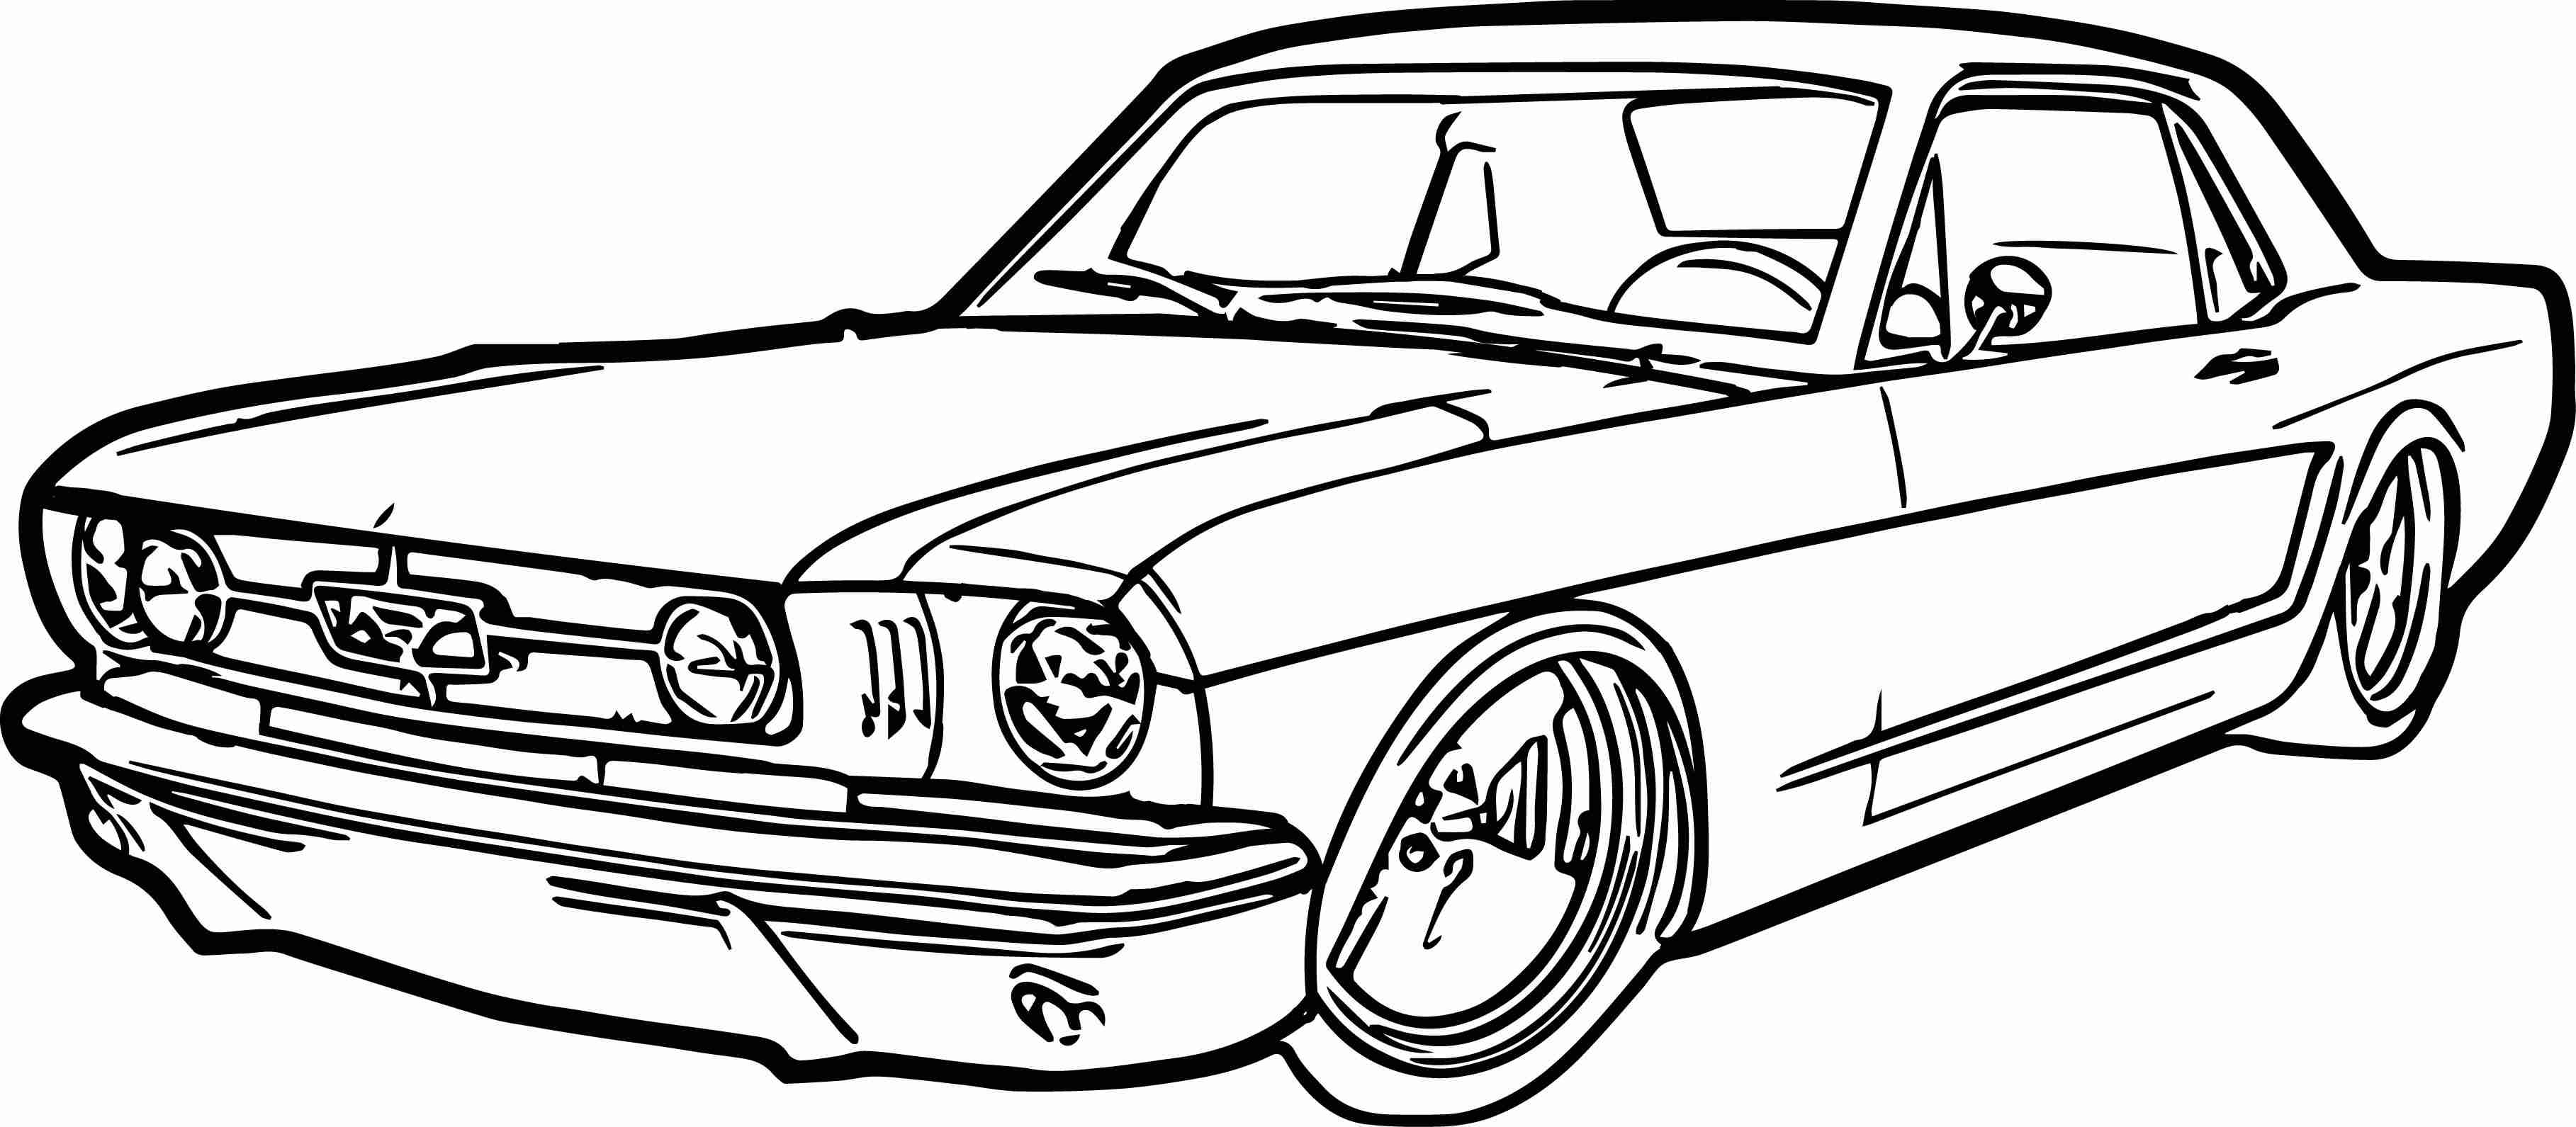 Camaro Ss Coloring Pages at GetColorings.com | Free printable colorings